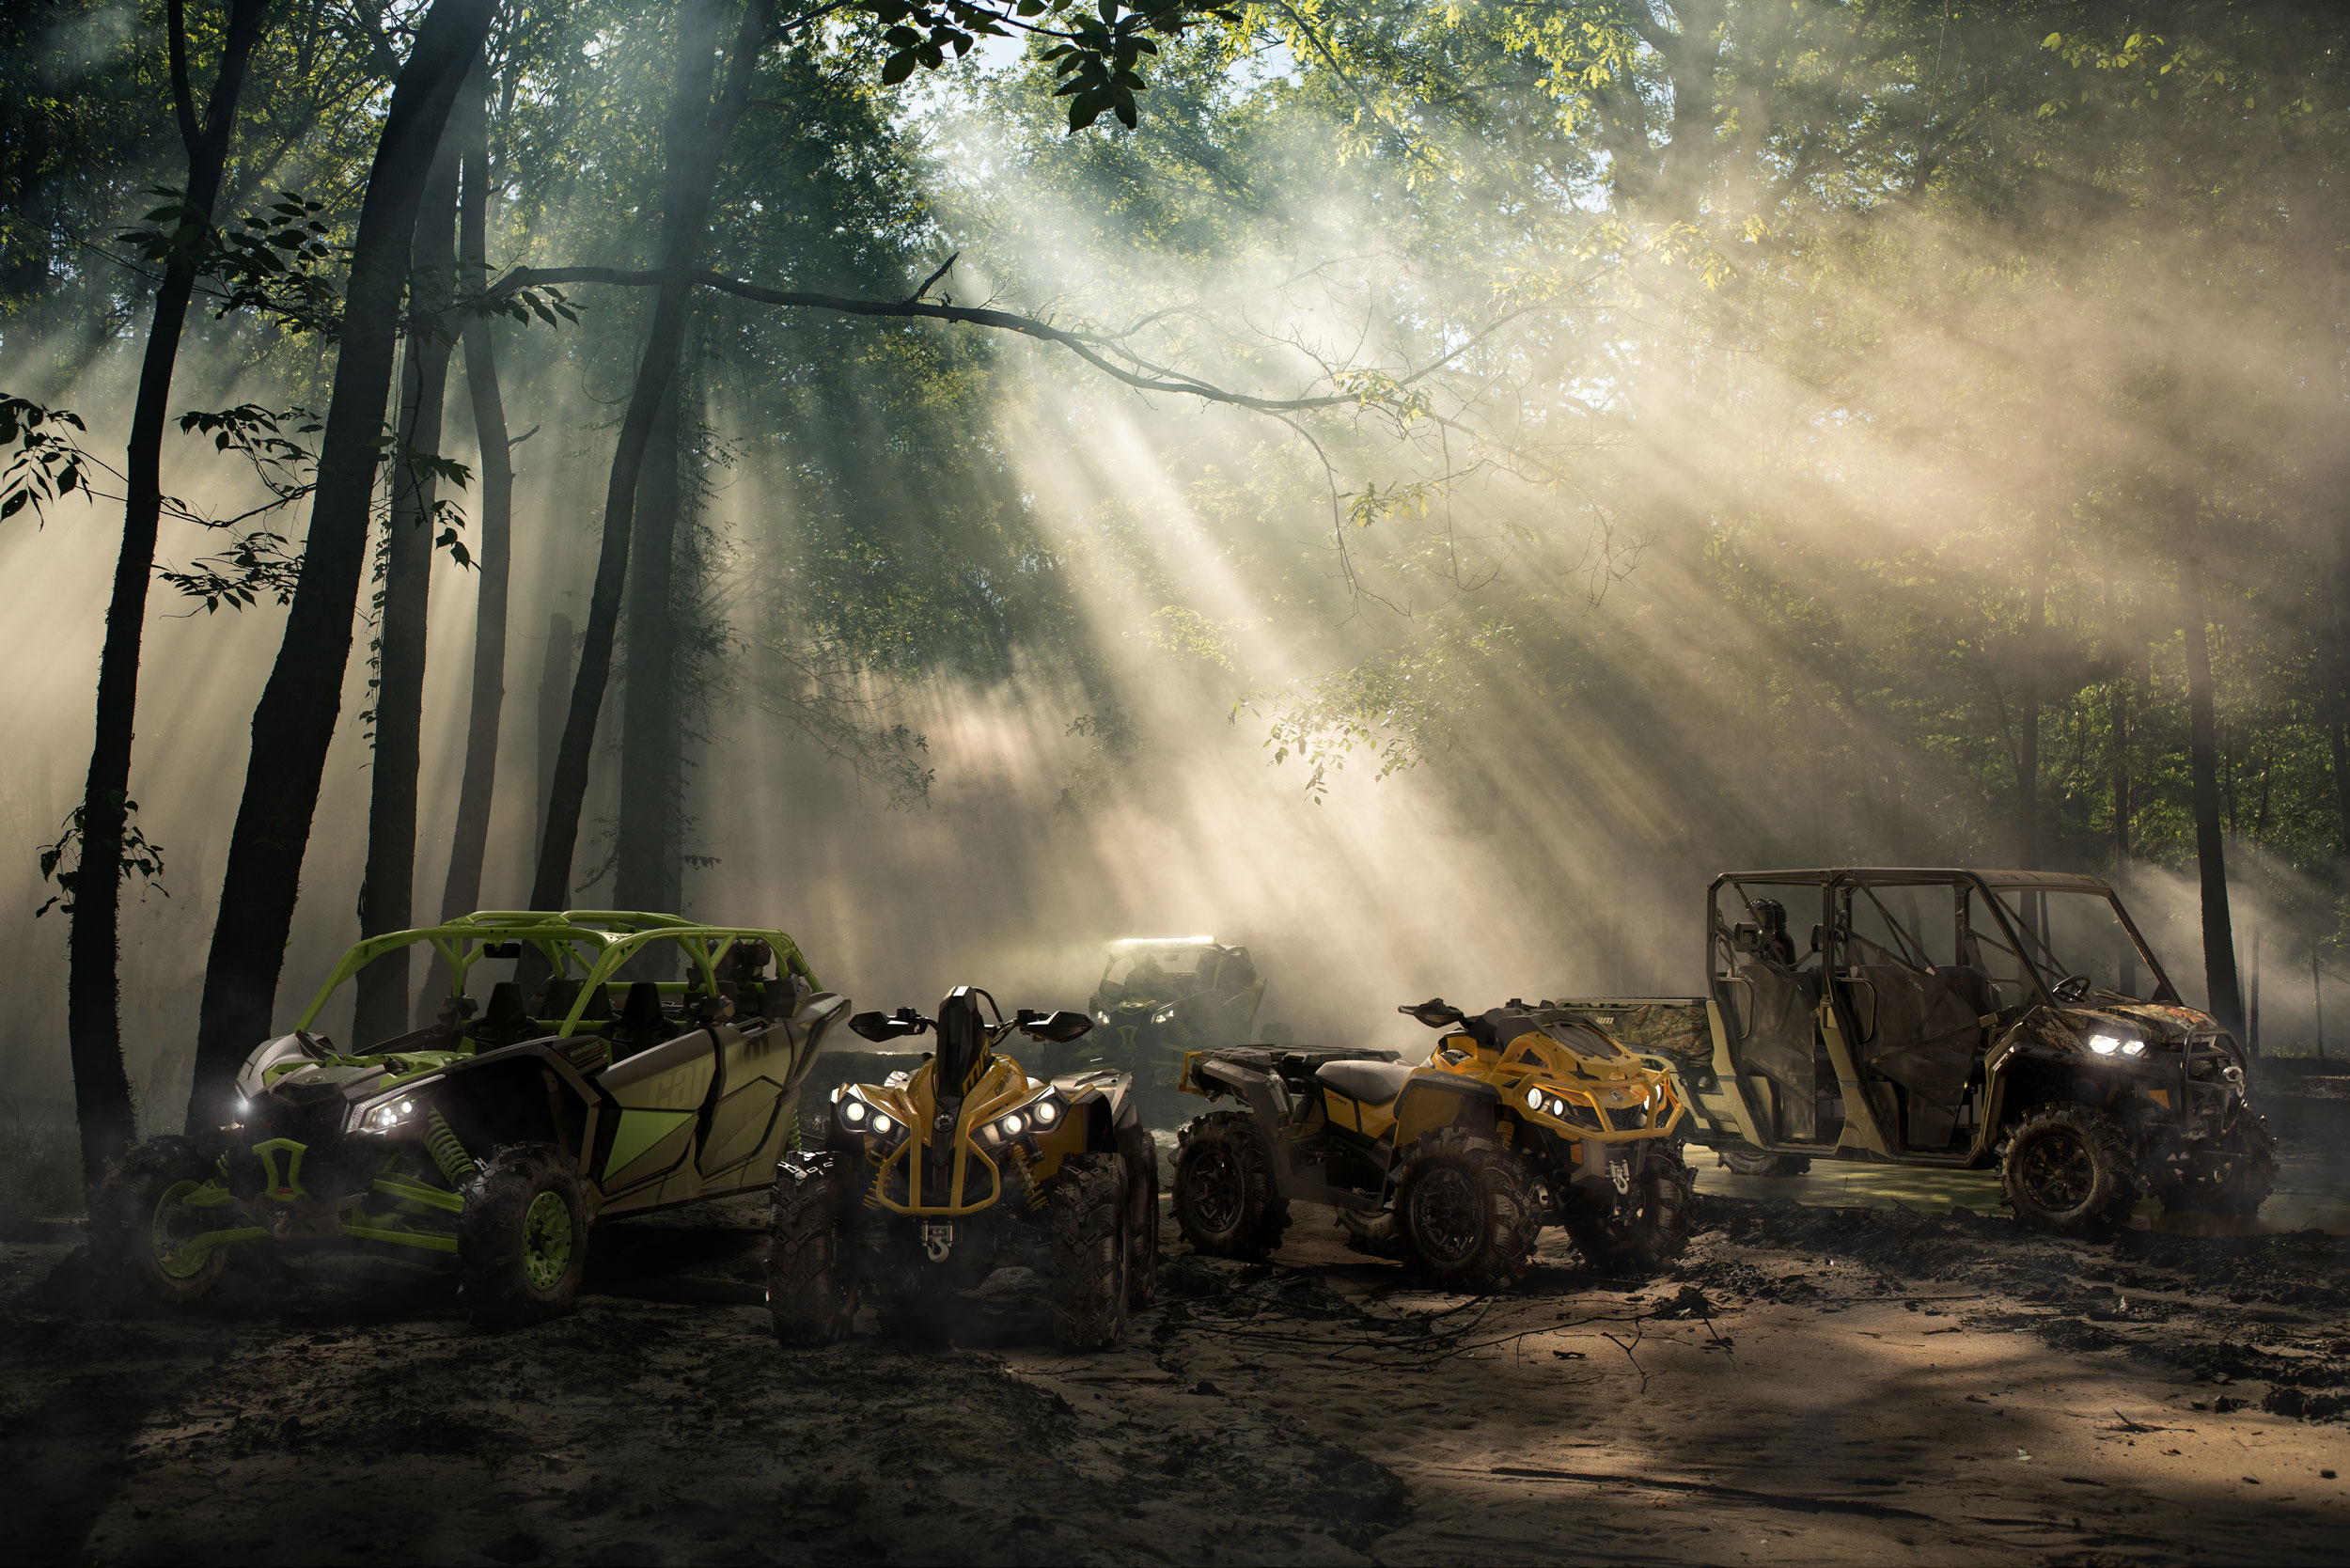 ATV VS SXS/UTV: DIFFERENCES, BENEFITS AND EVERYTHING IN BETWEEN